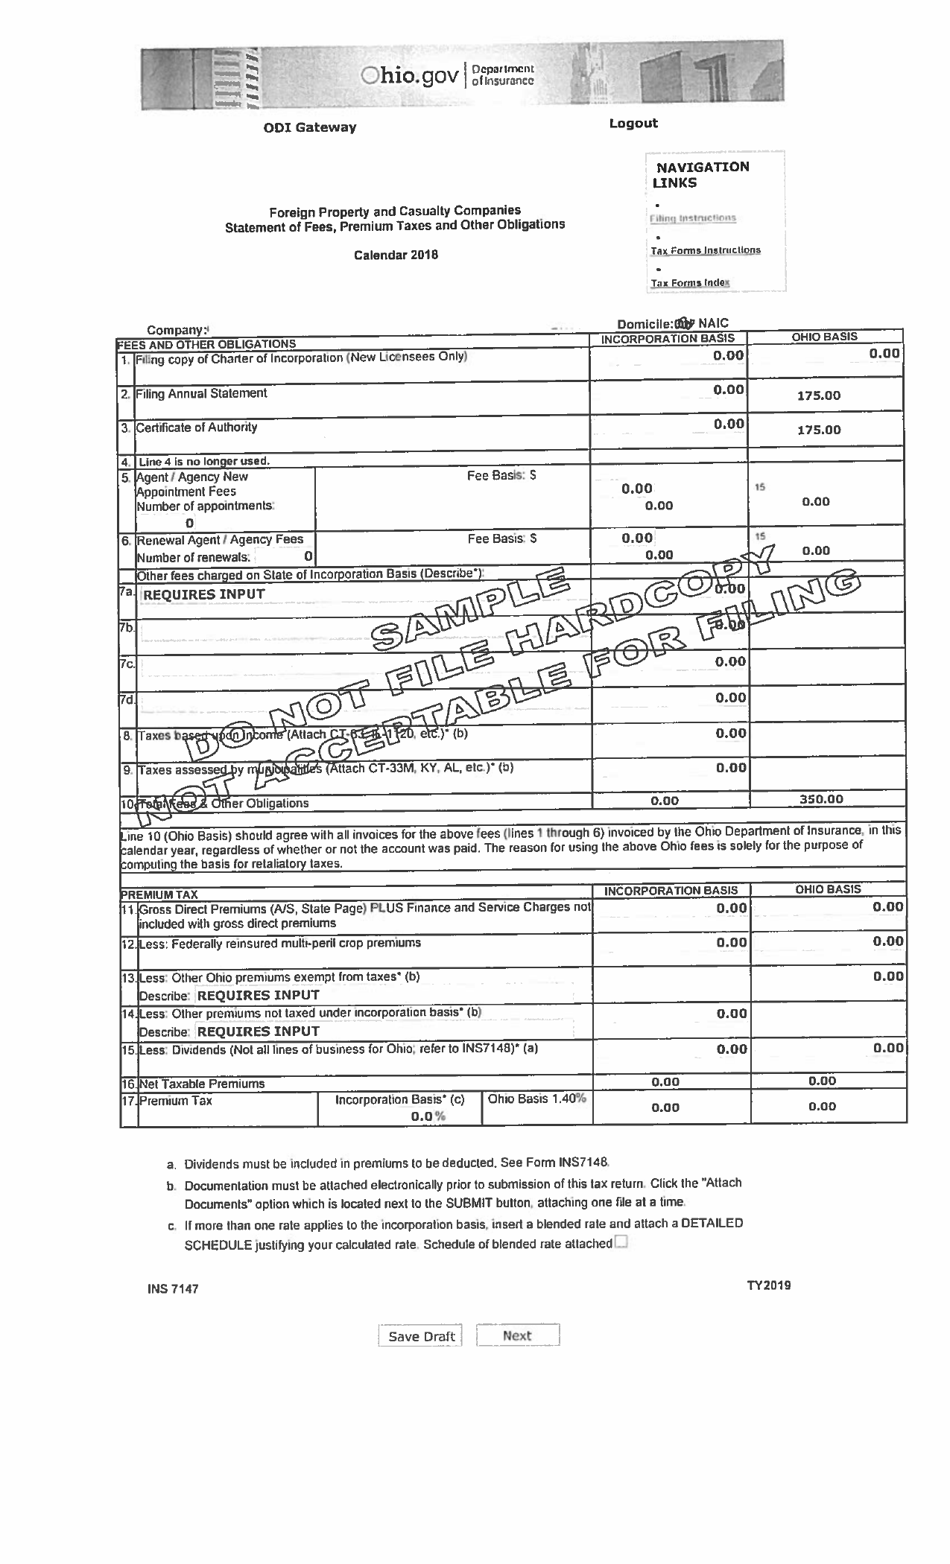 Sample Form INS7147 Foreign Property and Casualty Companies Statement of Fees, Premium Taxes and Other Obligations - Ohio, Page 1